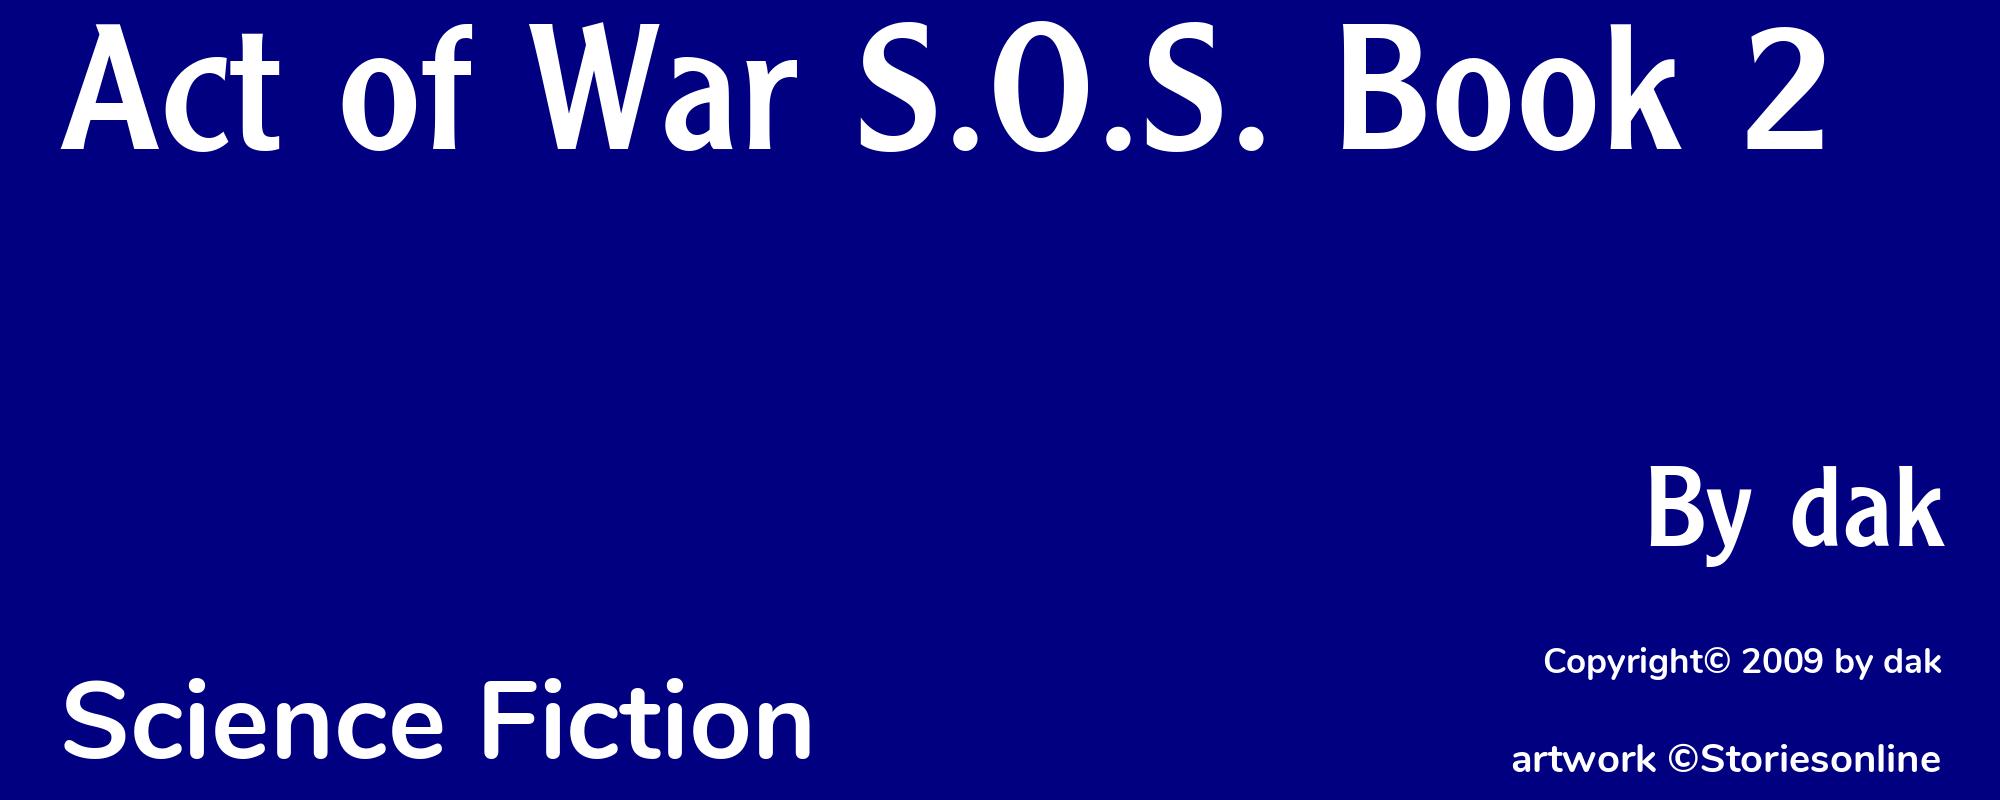 Act of War S.O.S. Book 2 - Cover